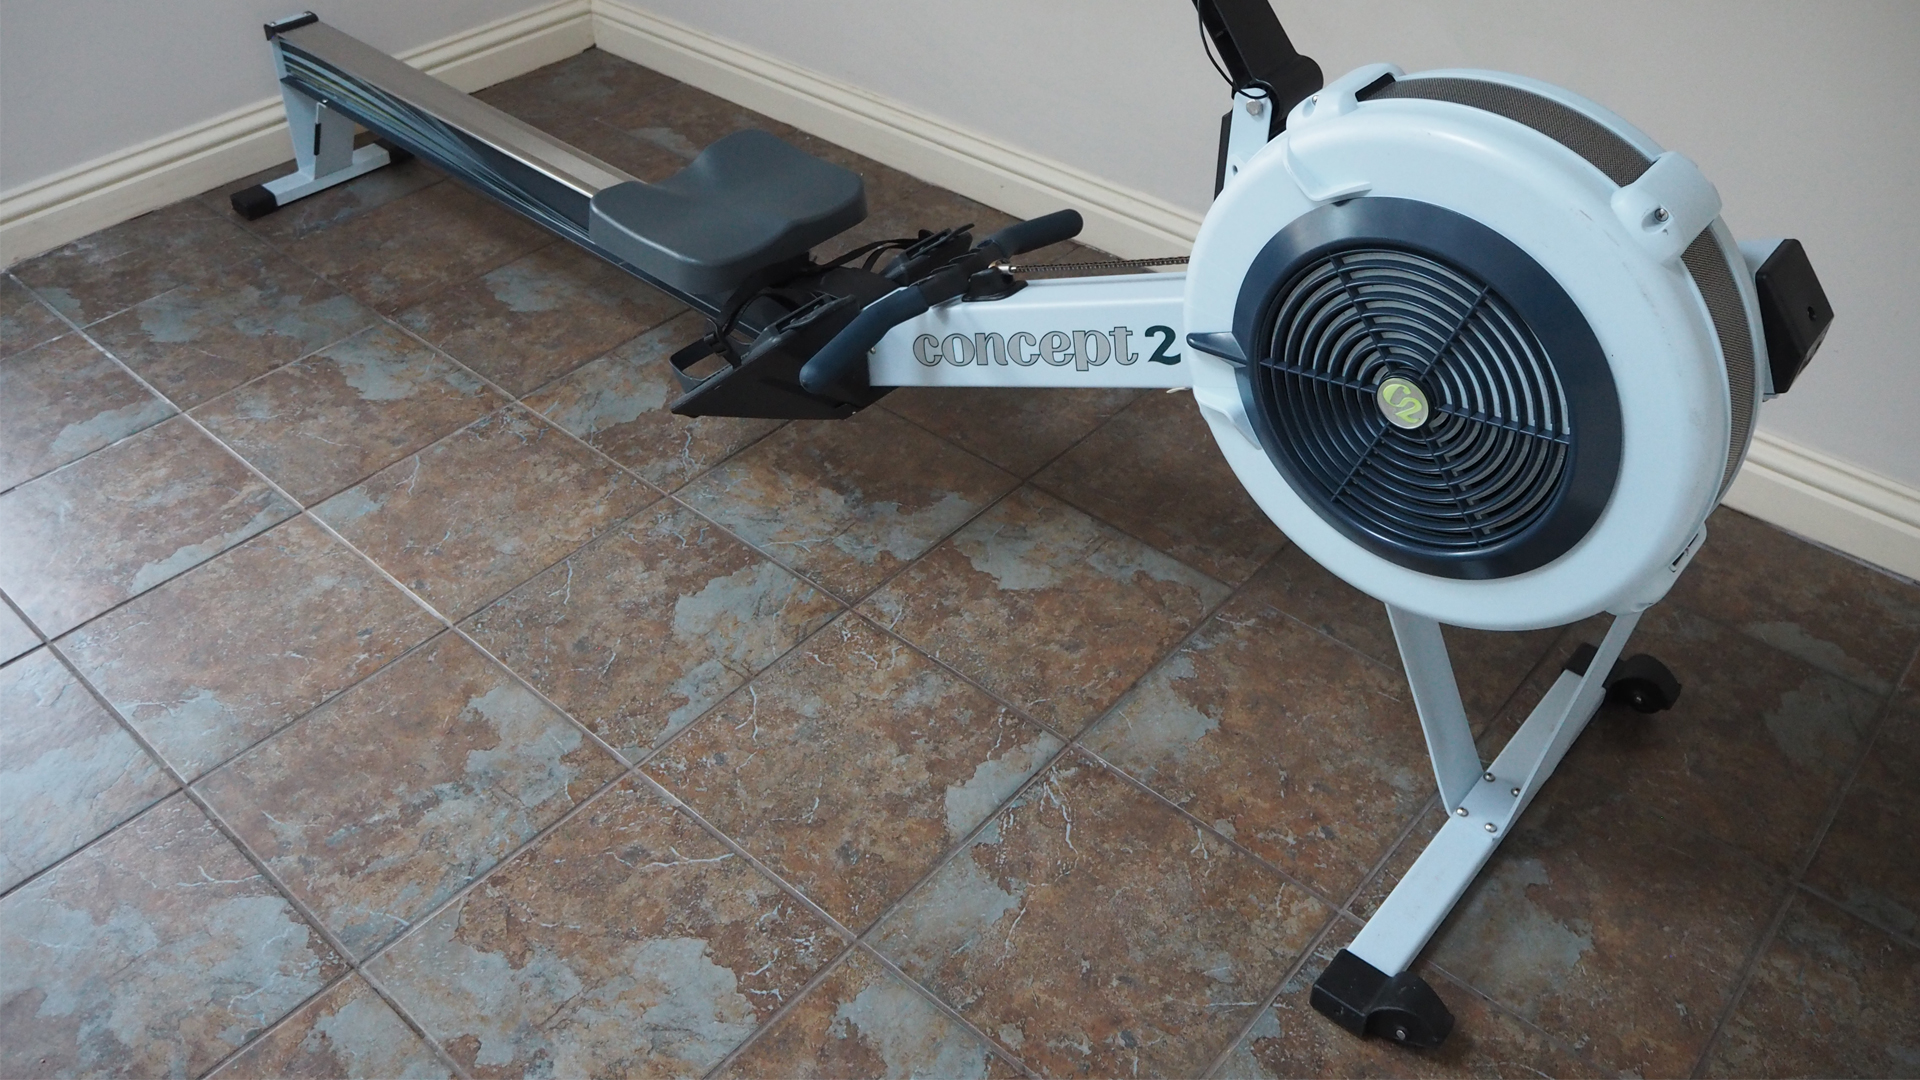 Concept2 RowErg review: image shows Concept2 RowErg